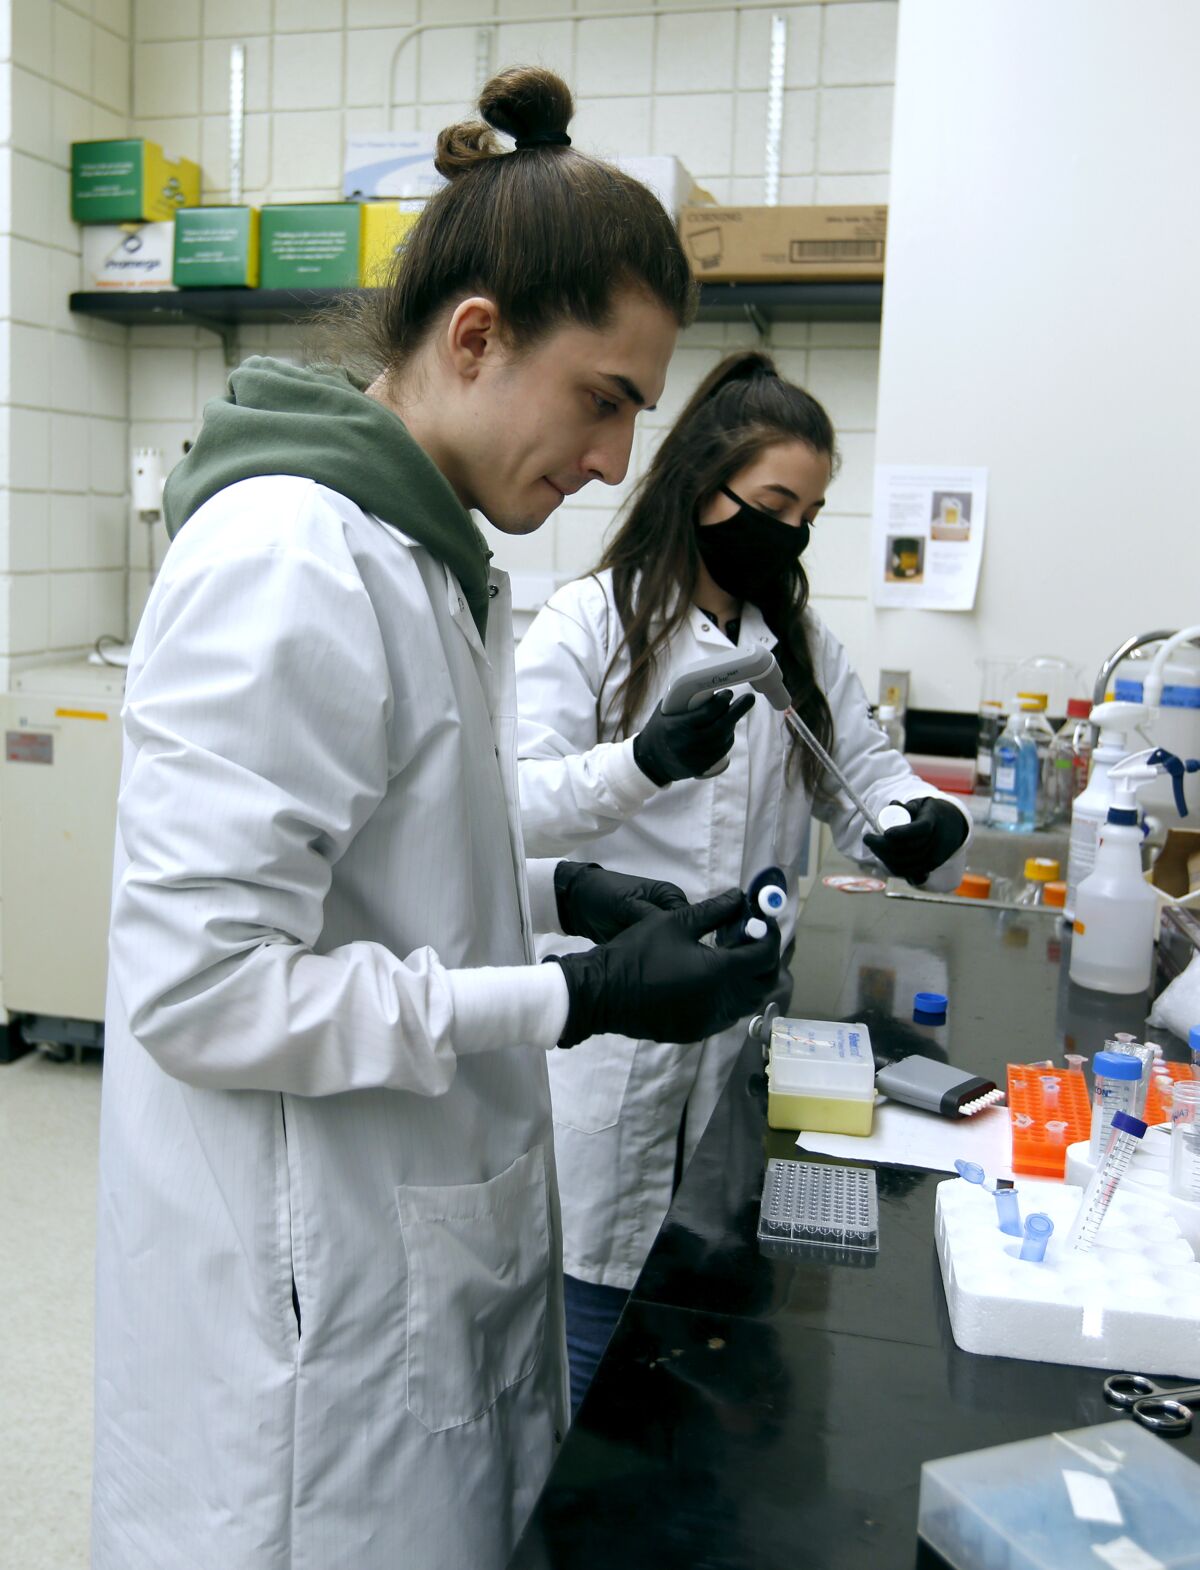 Siblings Sammy Alhassen, 23, left, and Wedad Alhassen, 25, and prepare tresting samples at a laboratory.